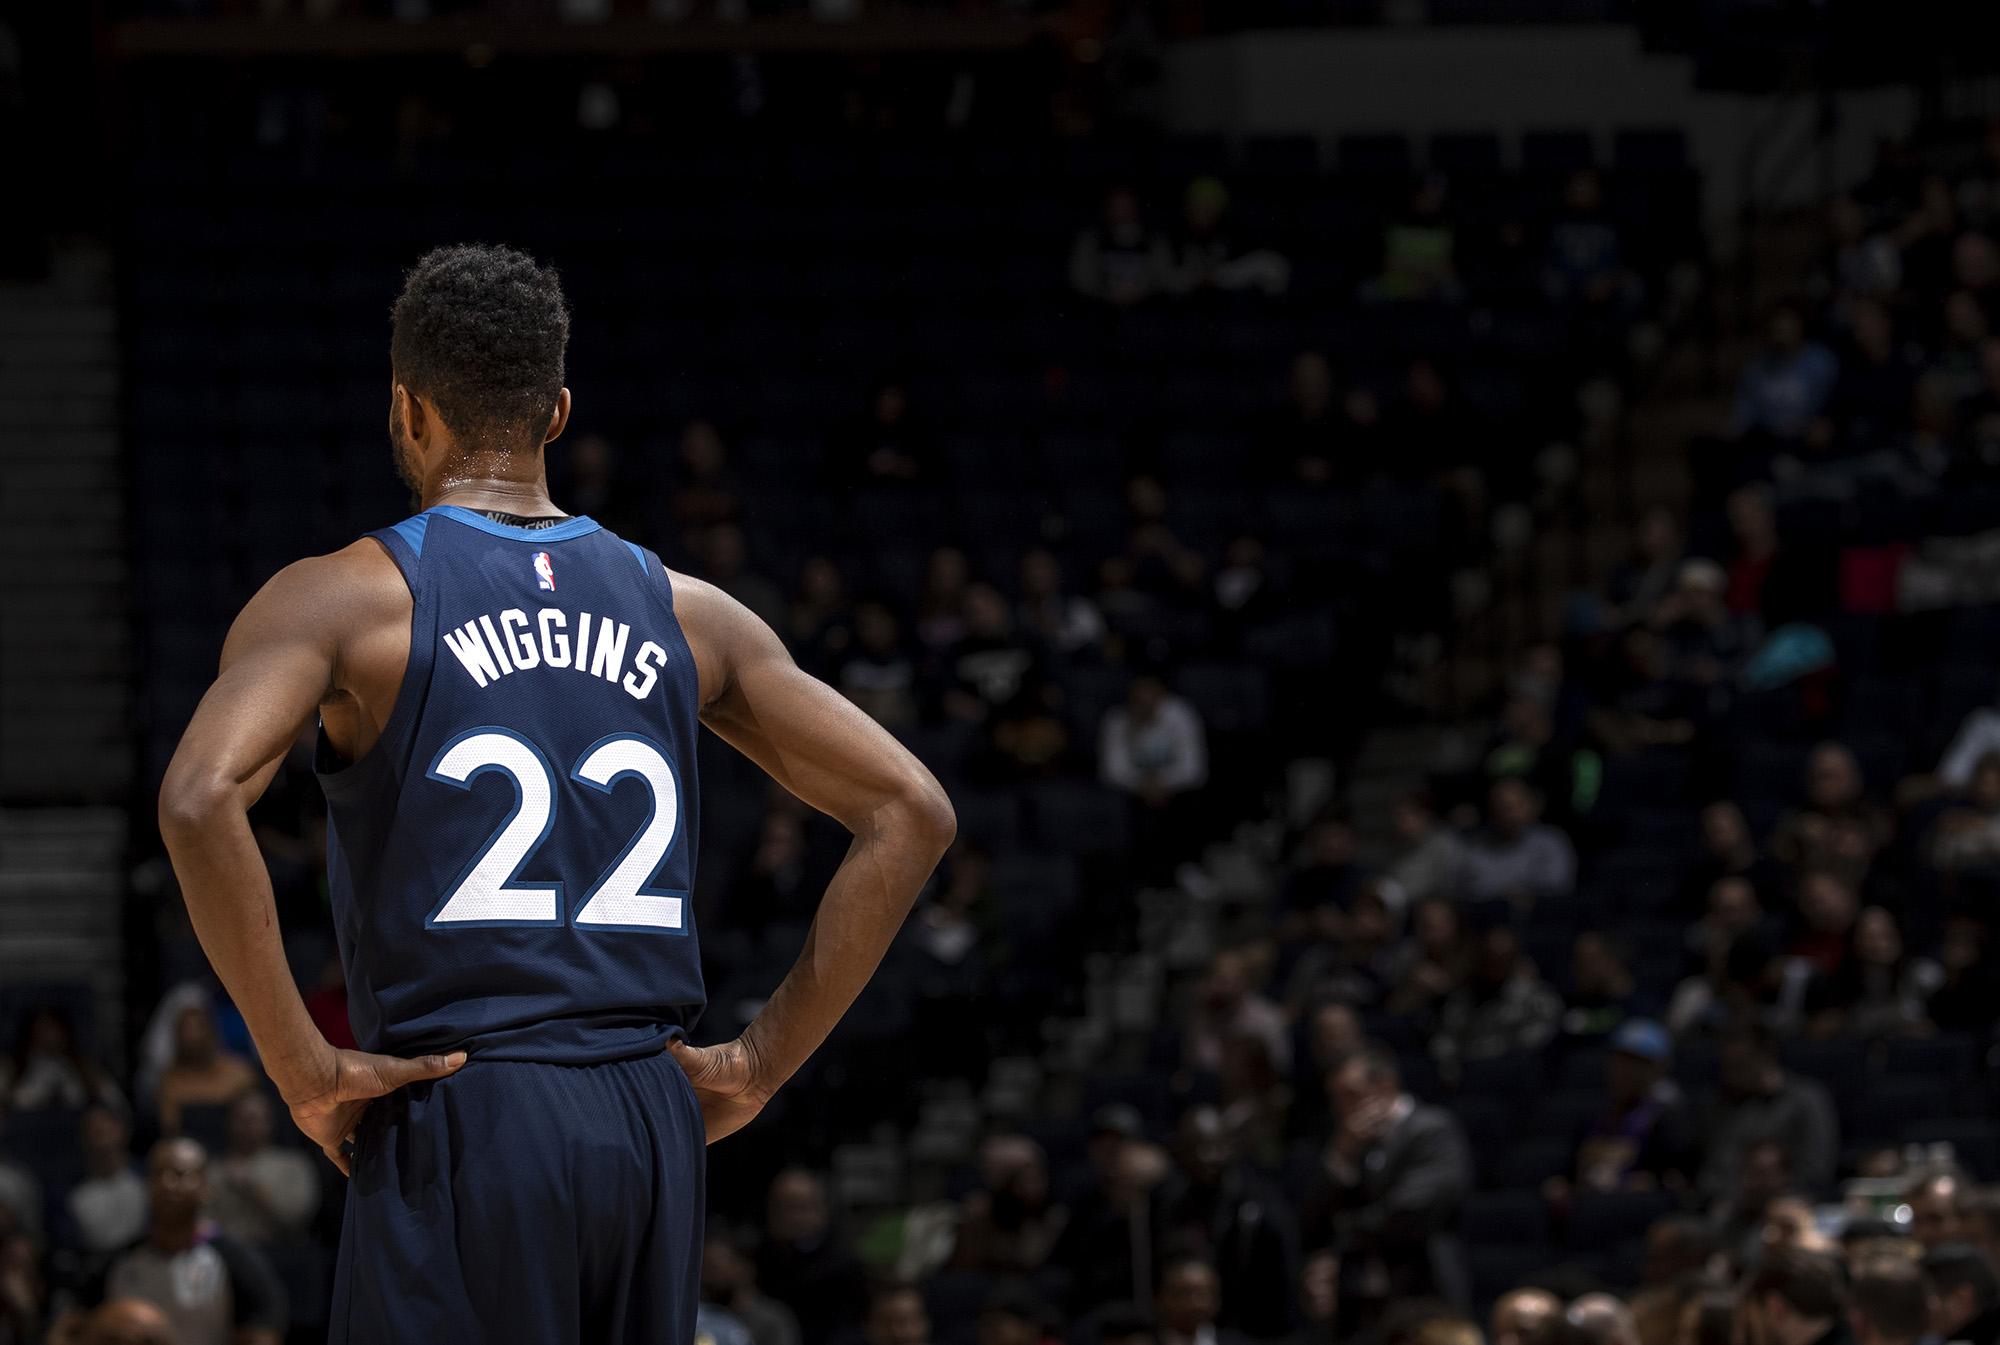 The Minnesota Timberwolves Andrew Wiggins (22) in the second quarter against the Atlanta Hawks at Target Center in Minneapolis on Wednesday, Feb. 5, 2020. (Carlos Gonzalez/Minneapolis Star Tribune/TNS)